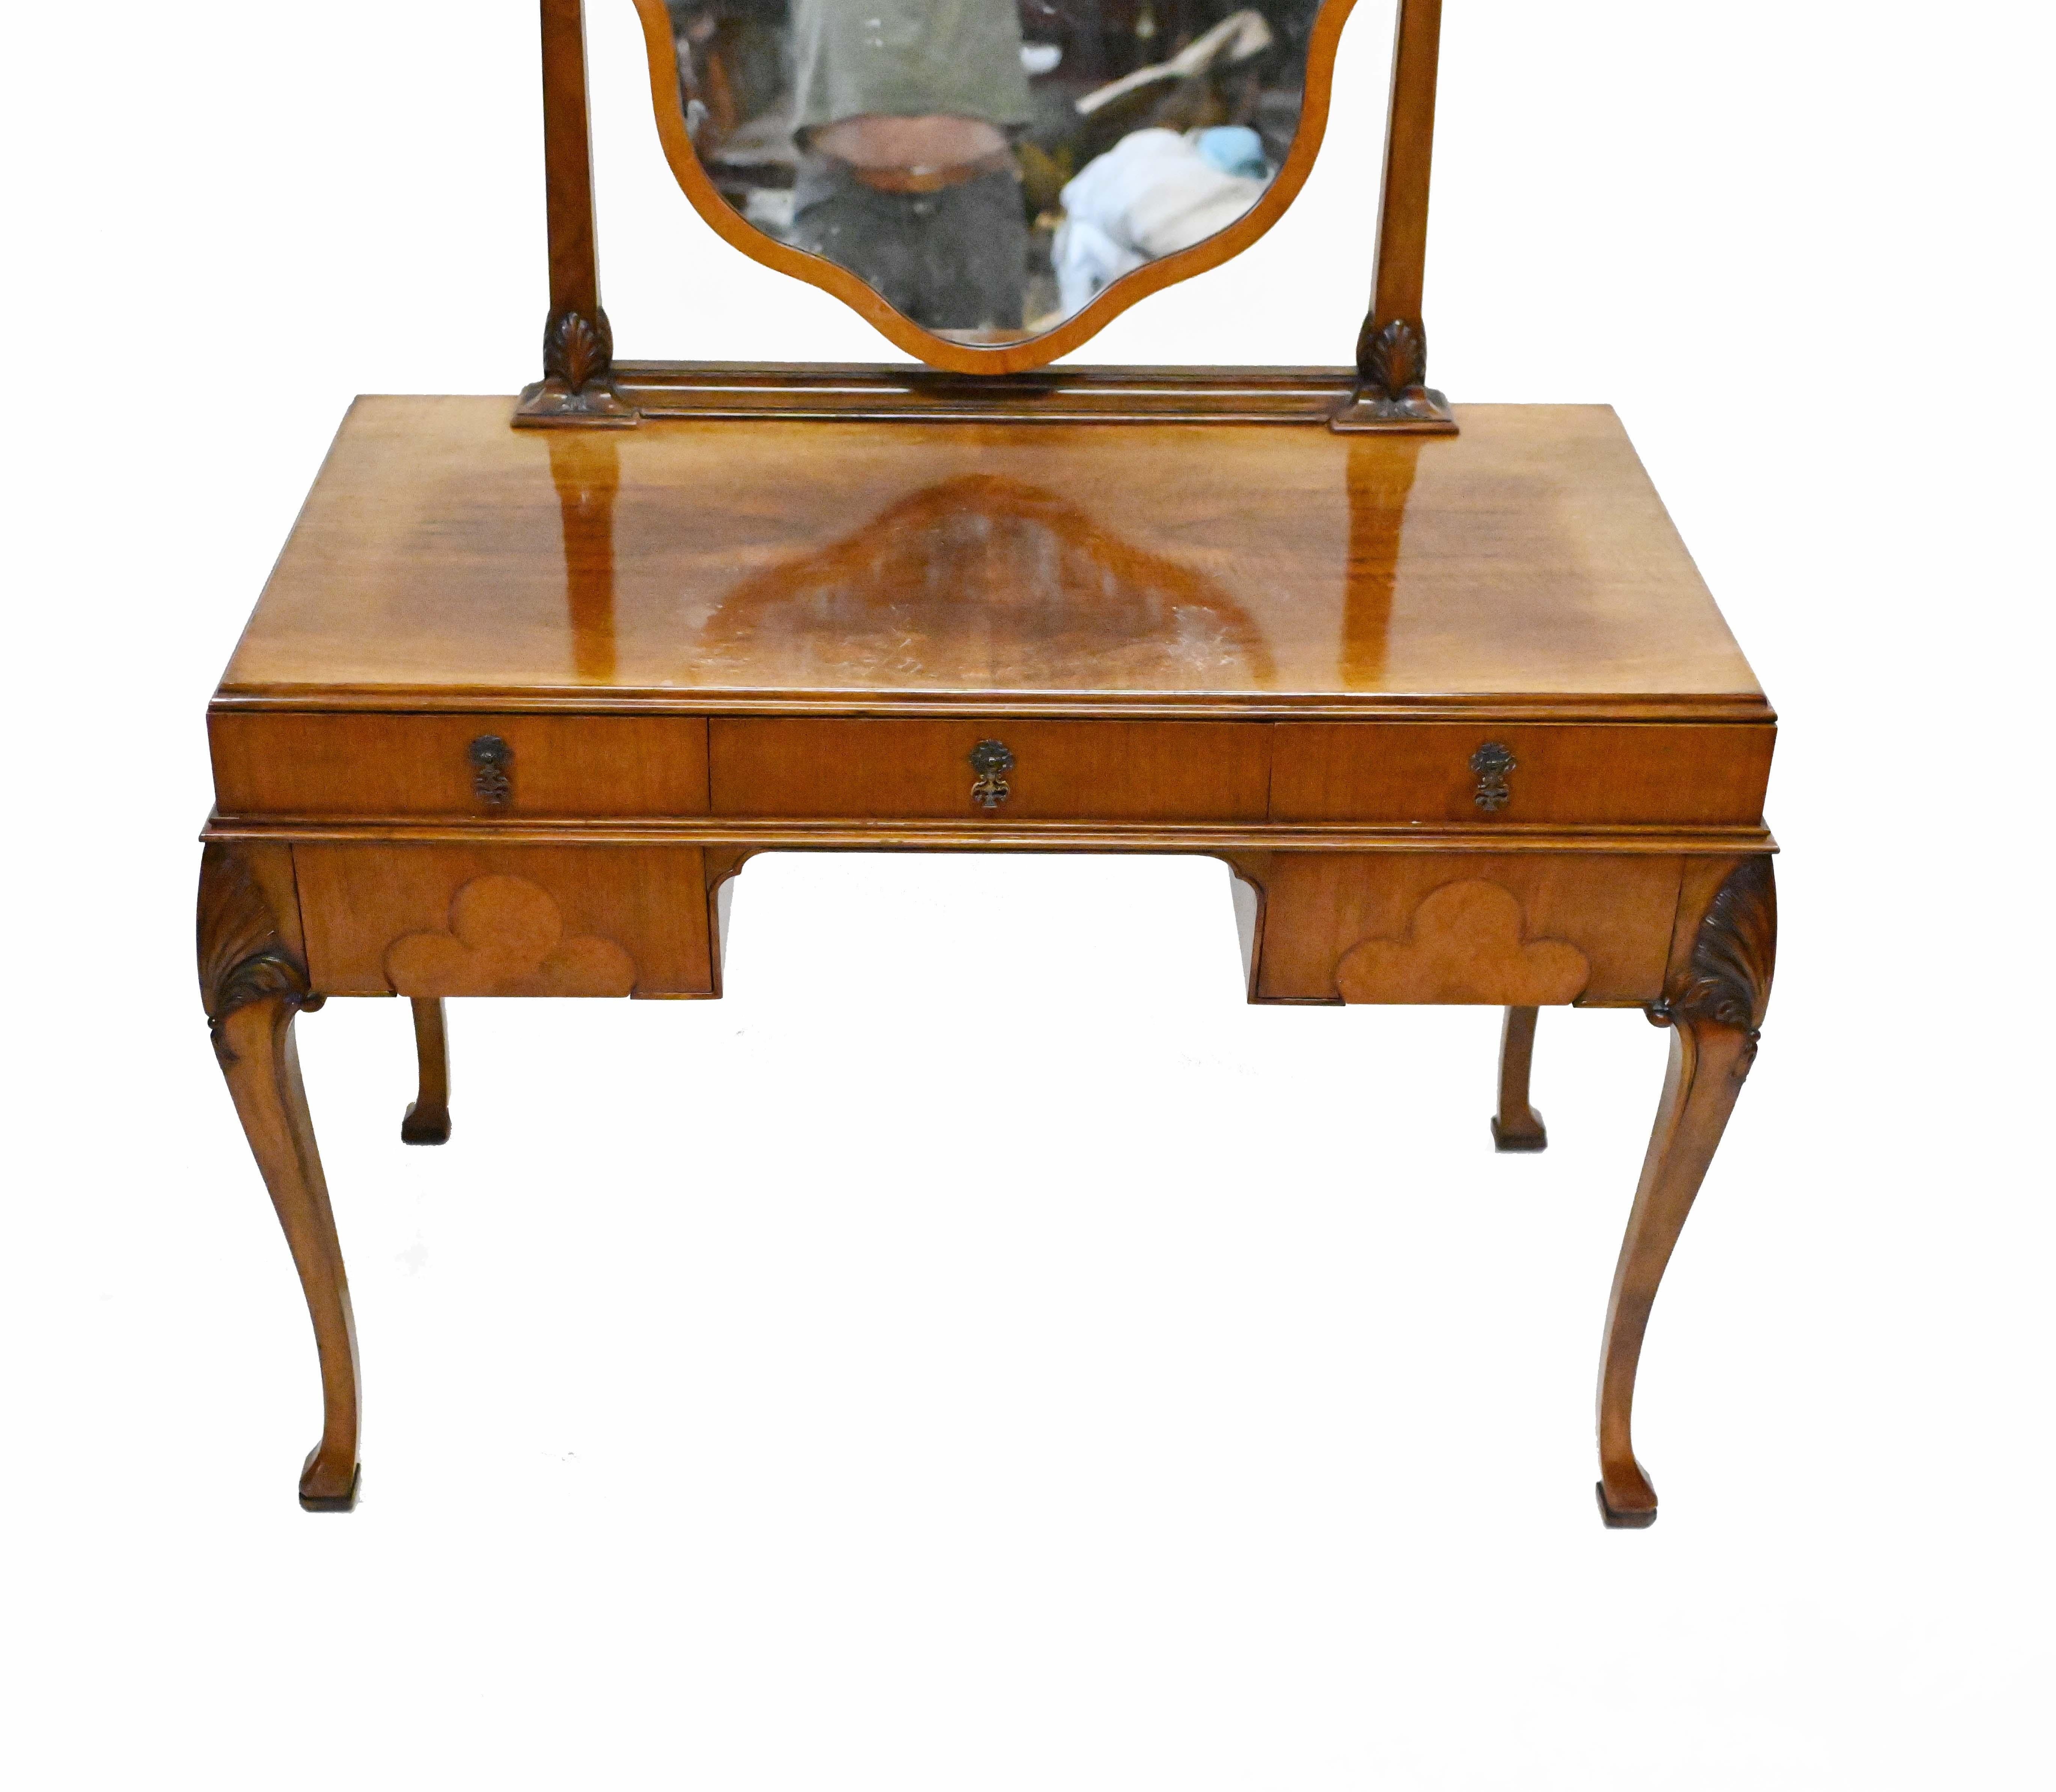 Cool vintage Epstein ladies dressing table in burr walnut
Features motifs below the drawers and is supported by carved cabriole legs
Epstein and Co were famous furniture makers working out of London in the 1920s
Mirror is on a swivel